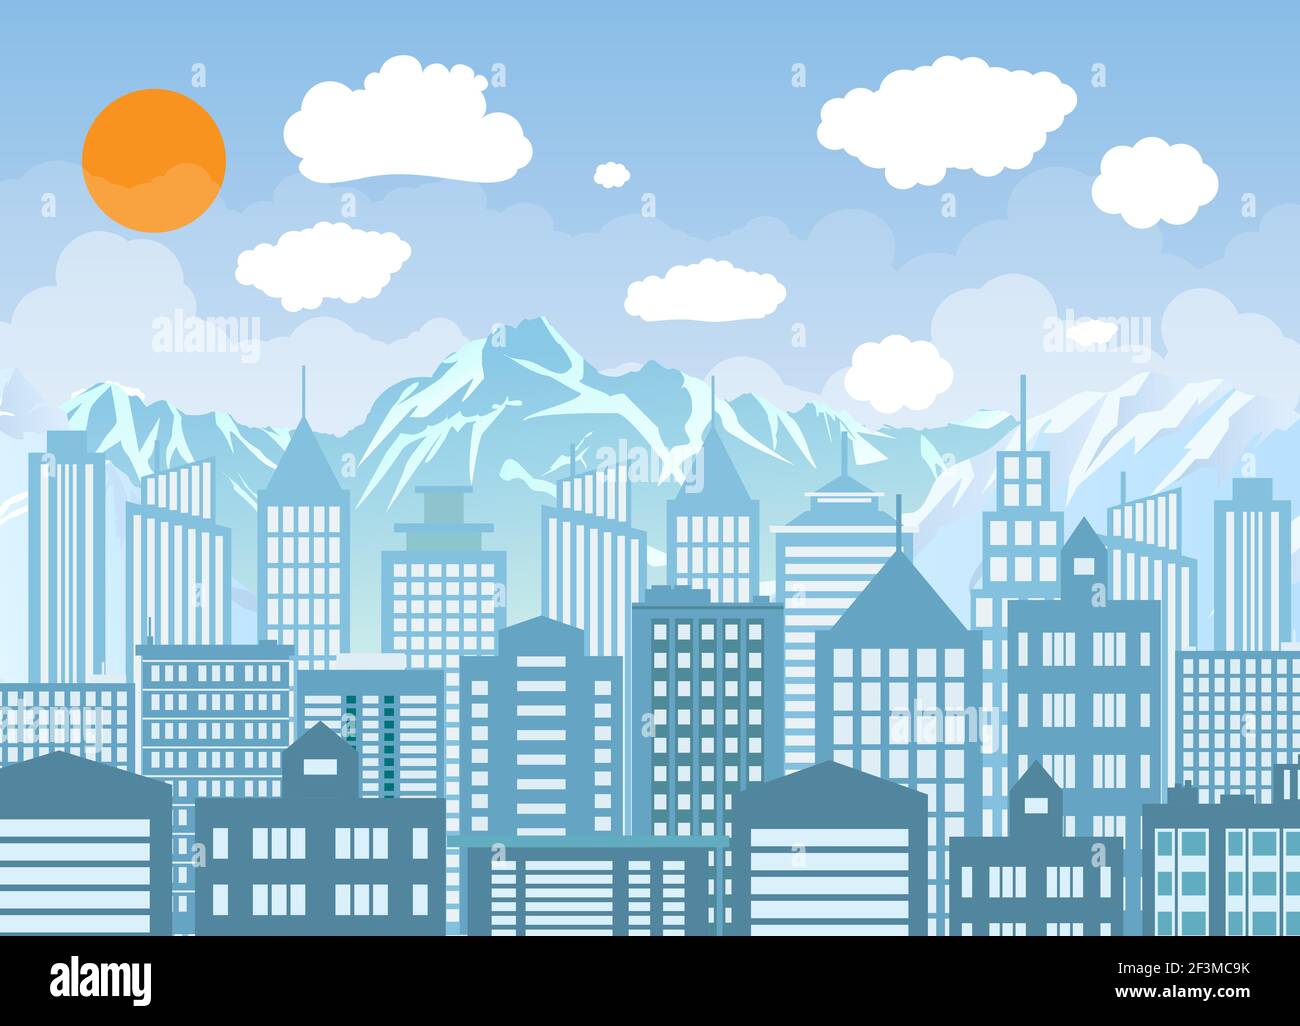 Buildings silhouette with windows cityscape Stock Vector